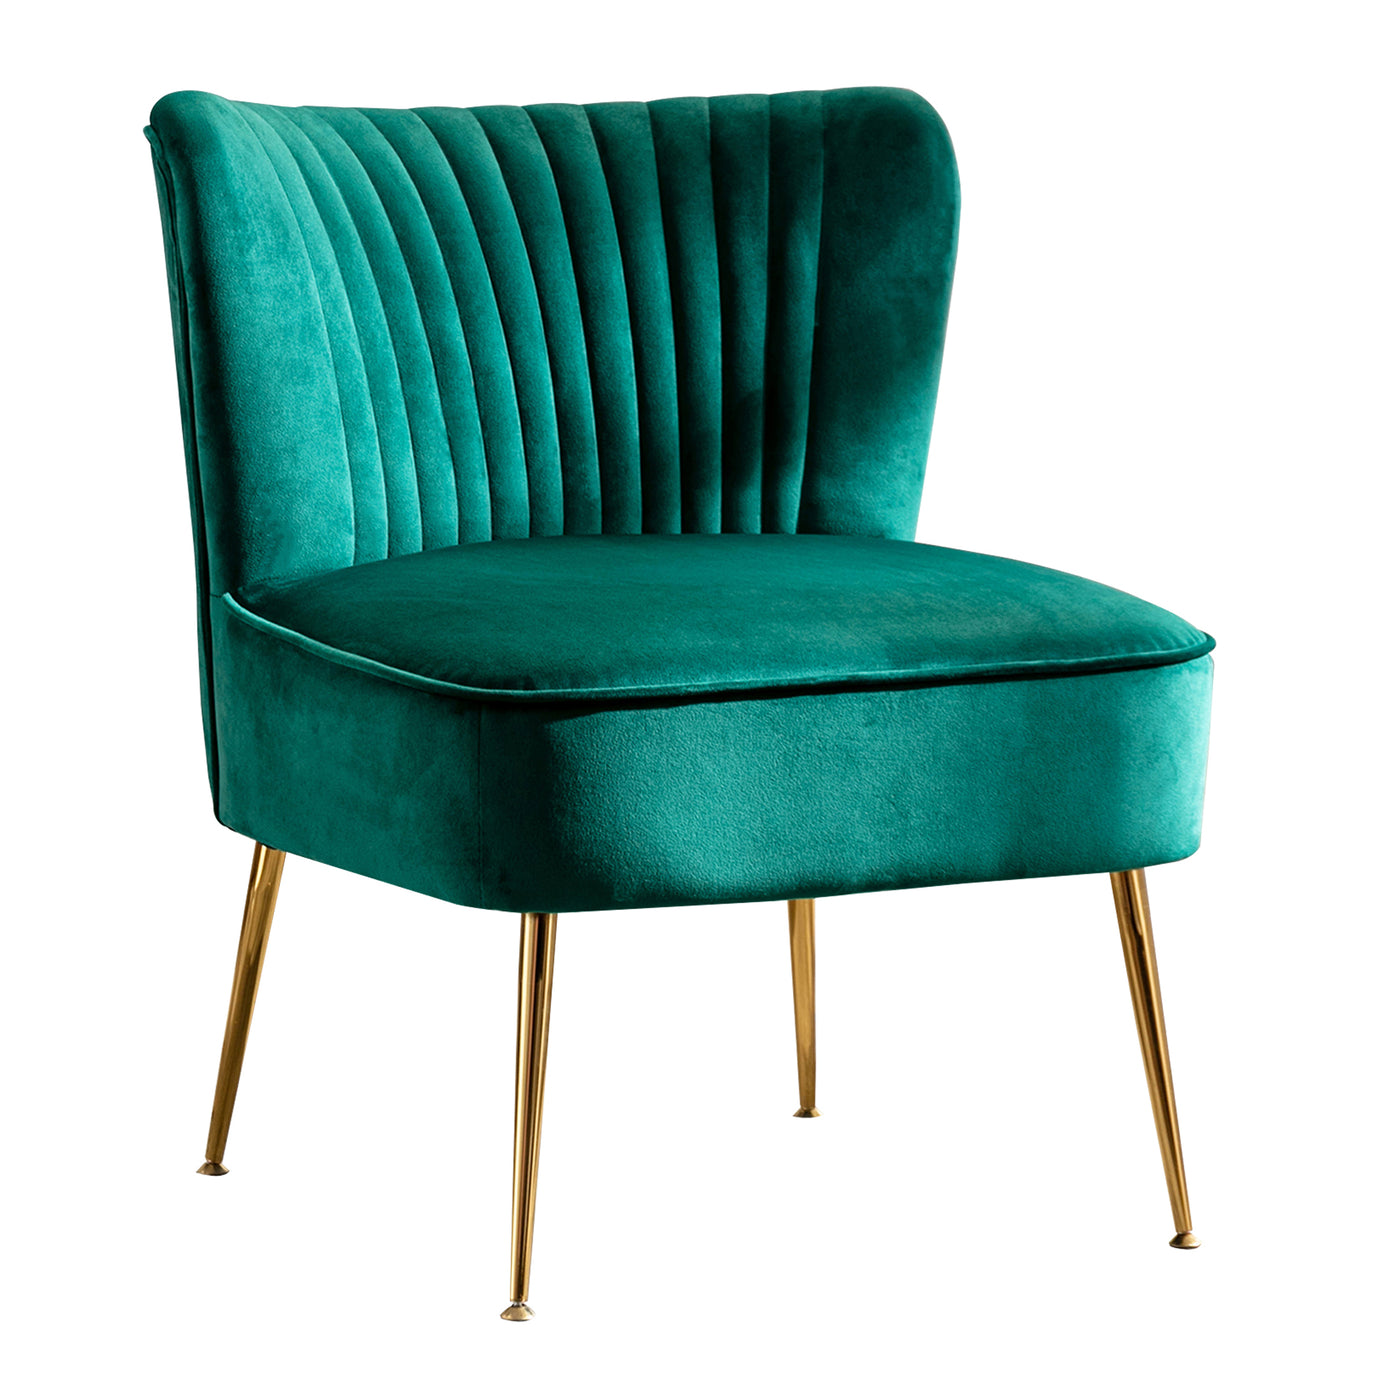 Phoebe 25" Wide Mid Century Accent Chair